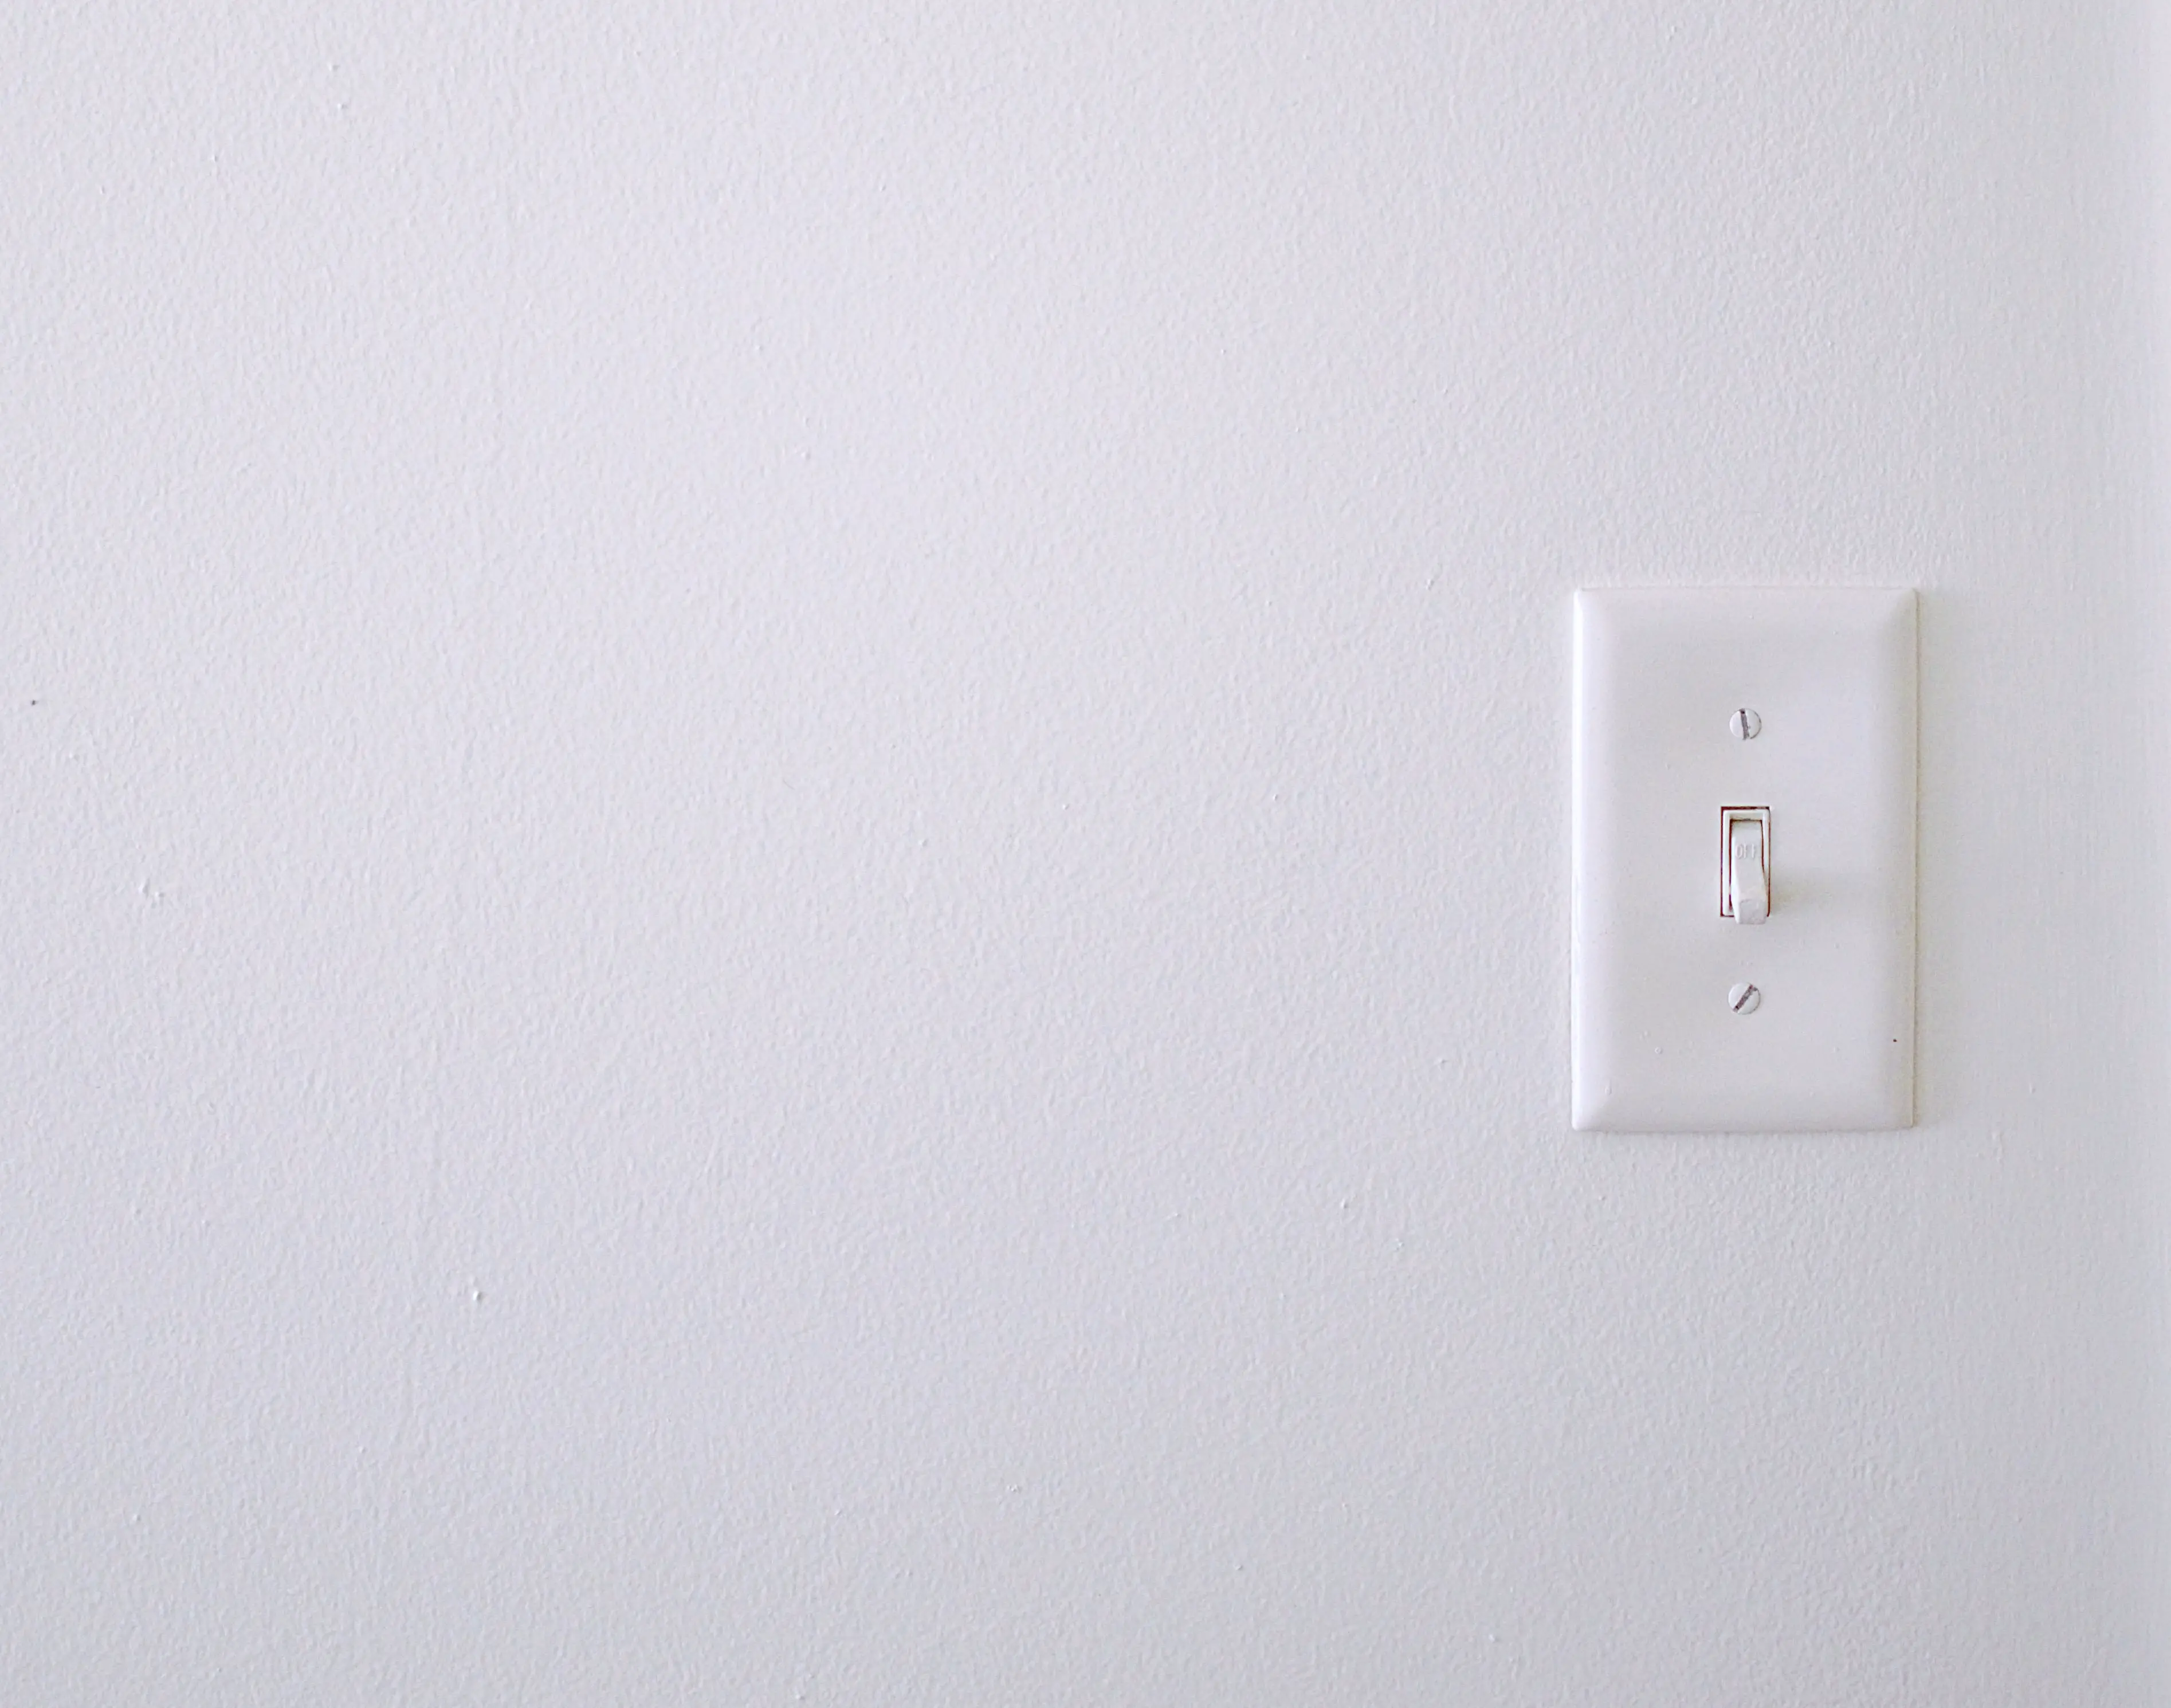 Troubleshoot faulty light switch